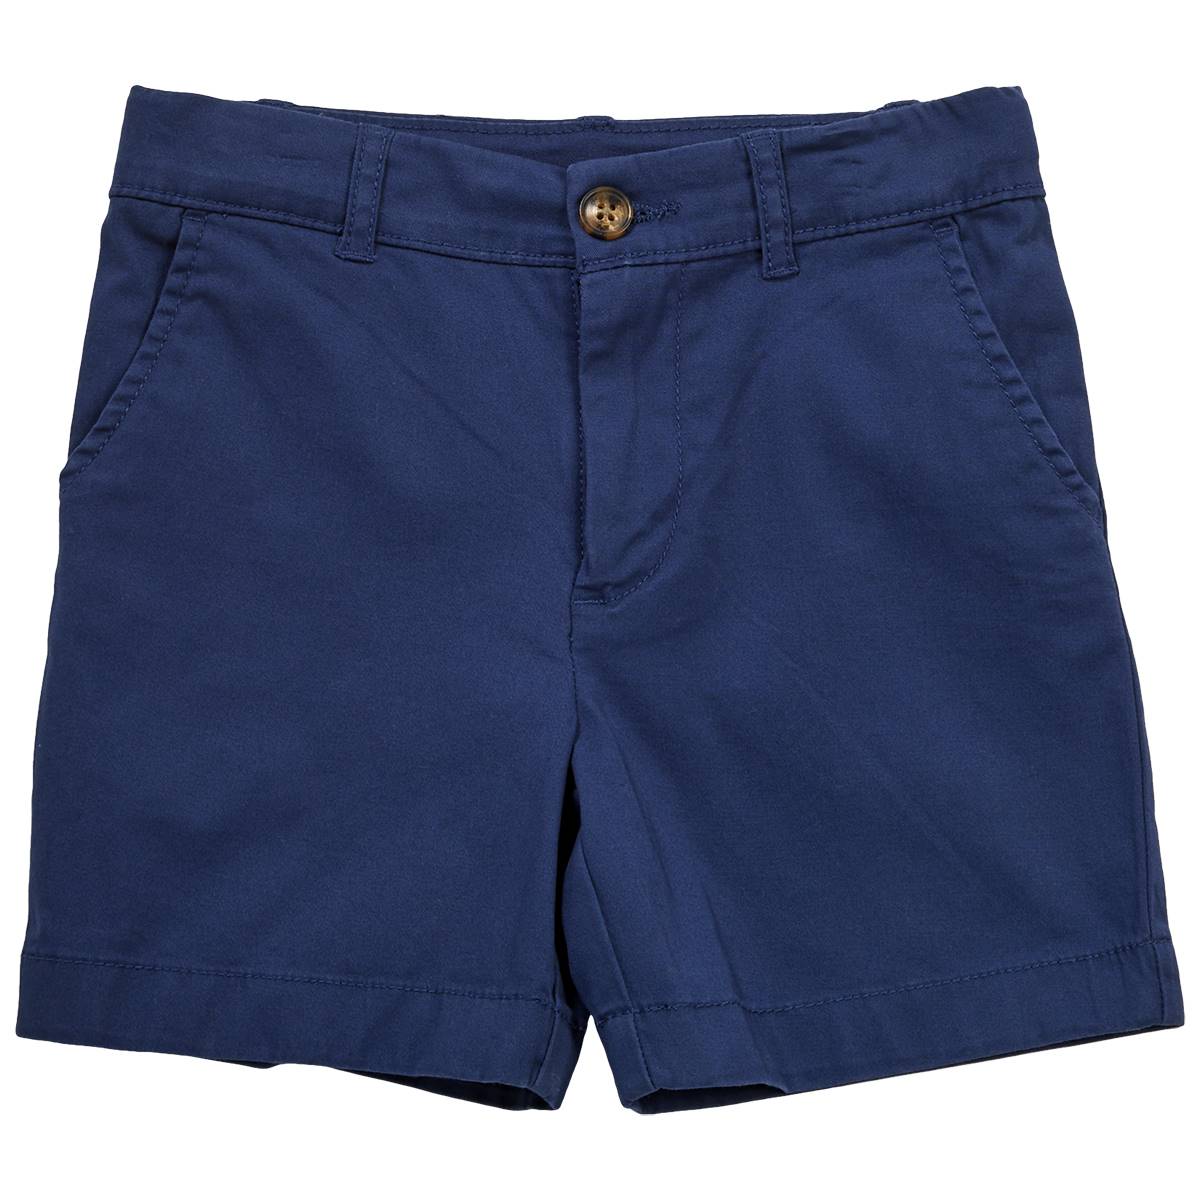 Boys (4-7) Carters(R) Flat Front Shorts